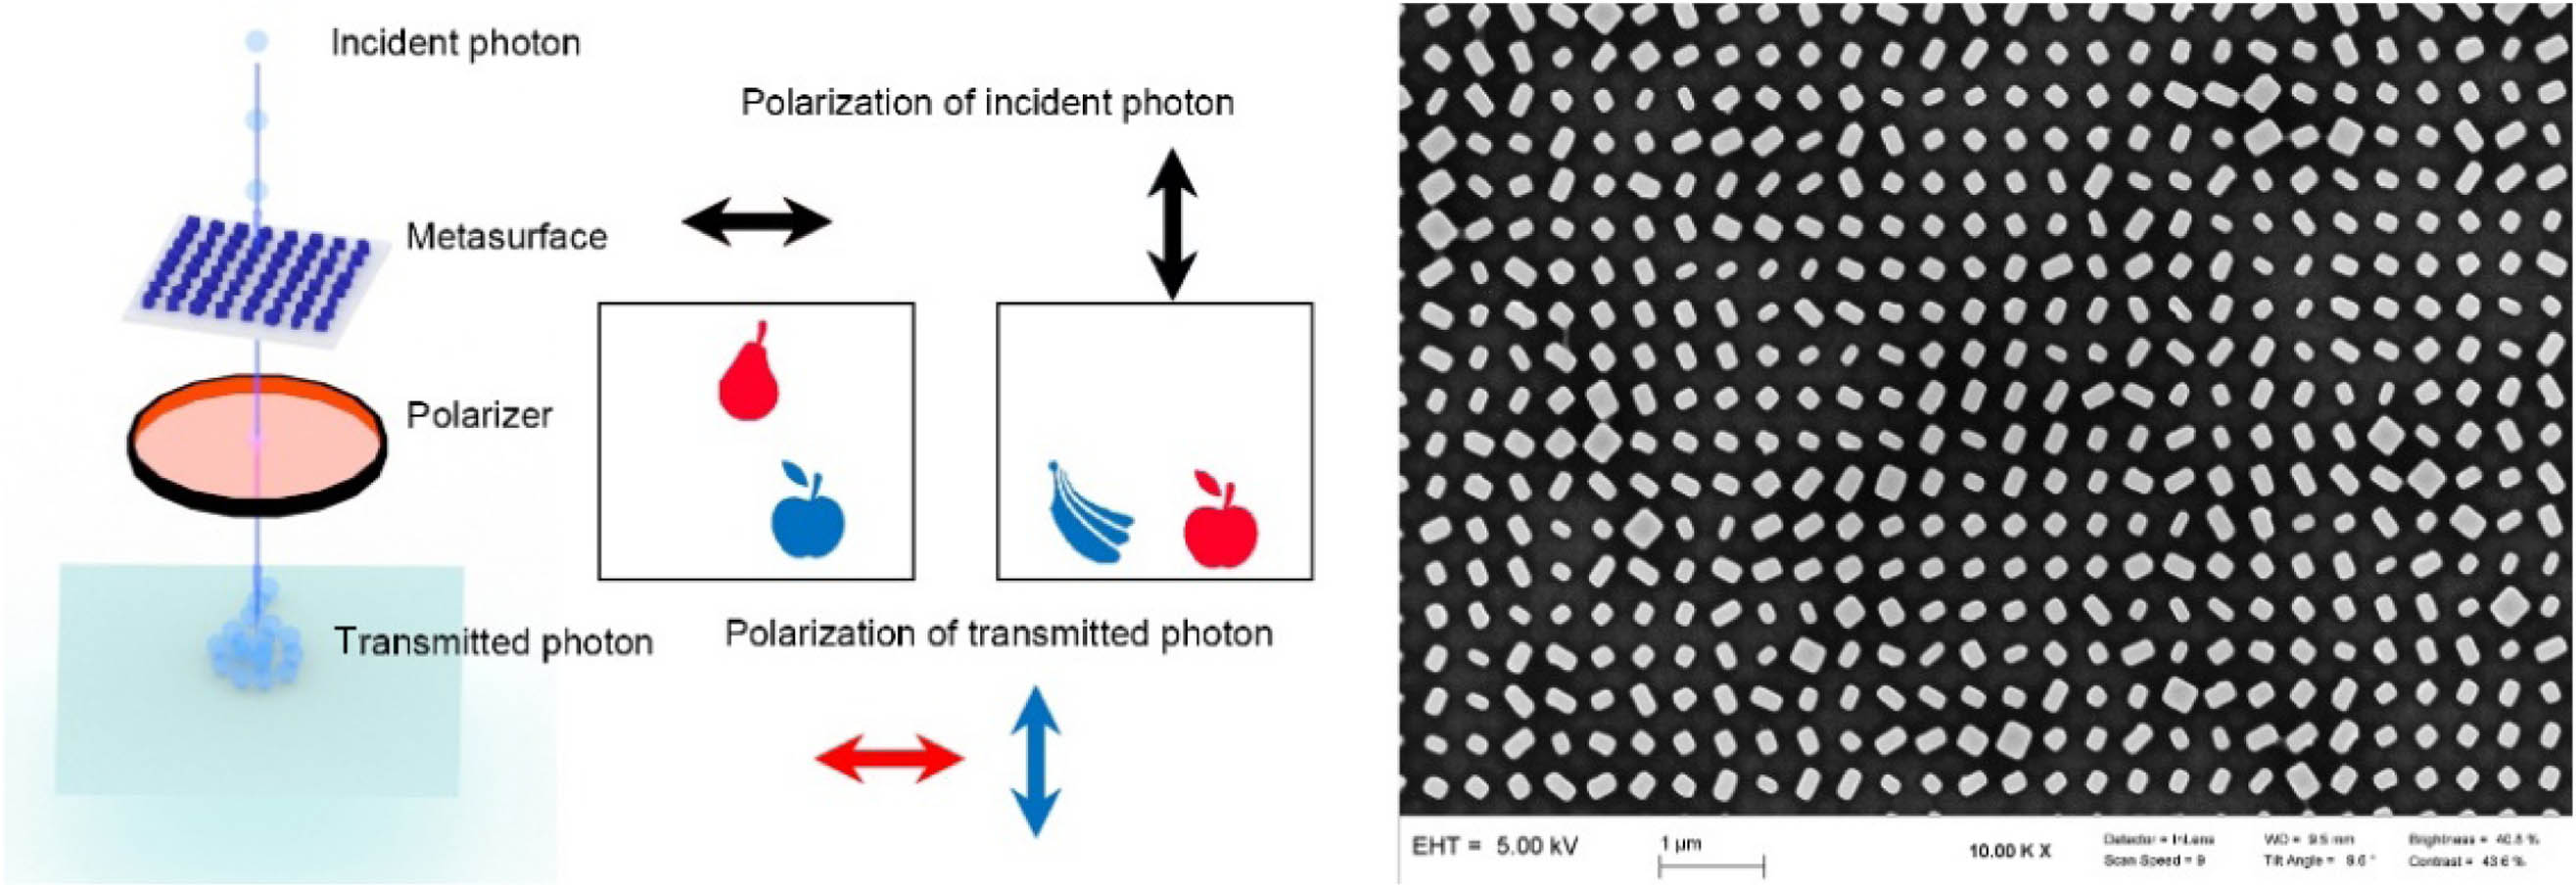 Schematic of quantum metasurface holography. The black arrow indicates the polarization state of incident photons, the red pattern indicates that the polarizer transmits horizontally polarized light, and the blue pattern indicates that the polarizer transmits vertically polarized light. On the right is the scanning electron microscope (SEM) image of our metasurface sample.